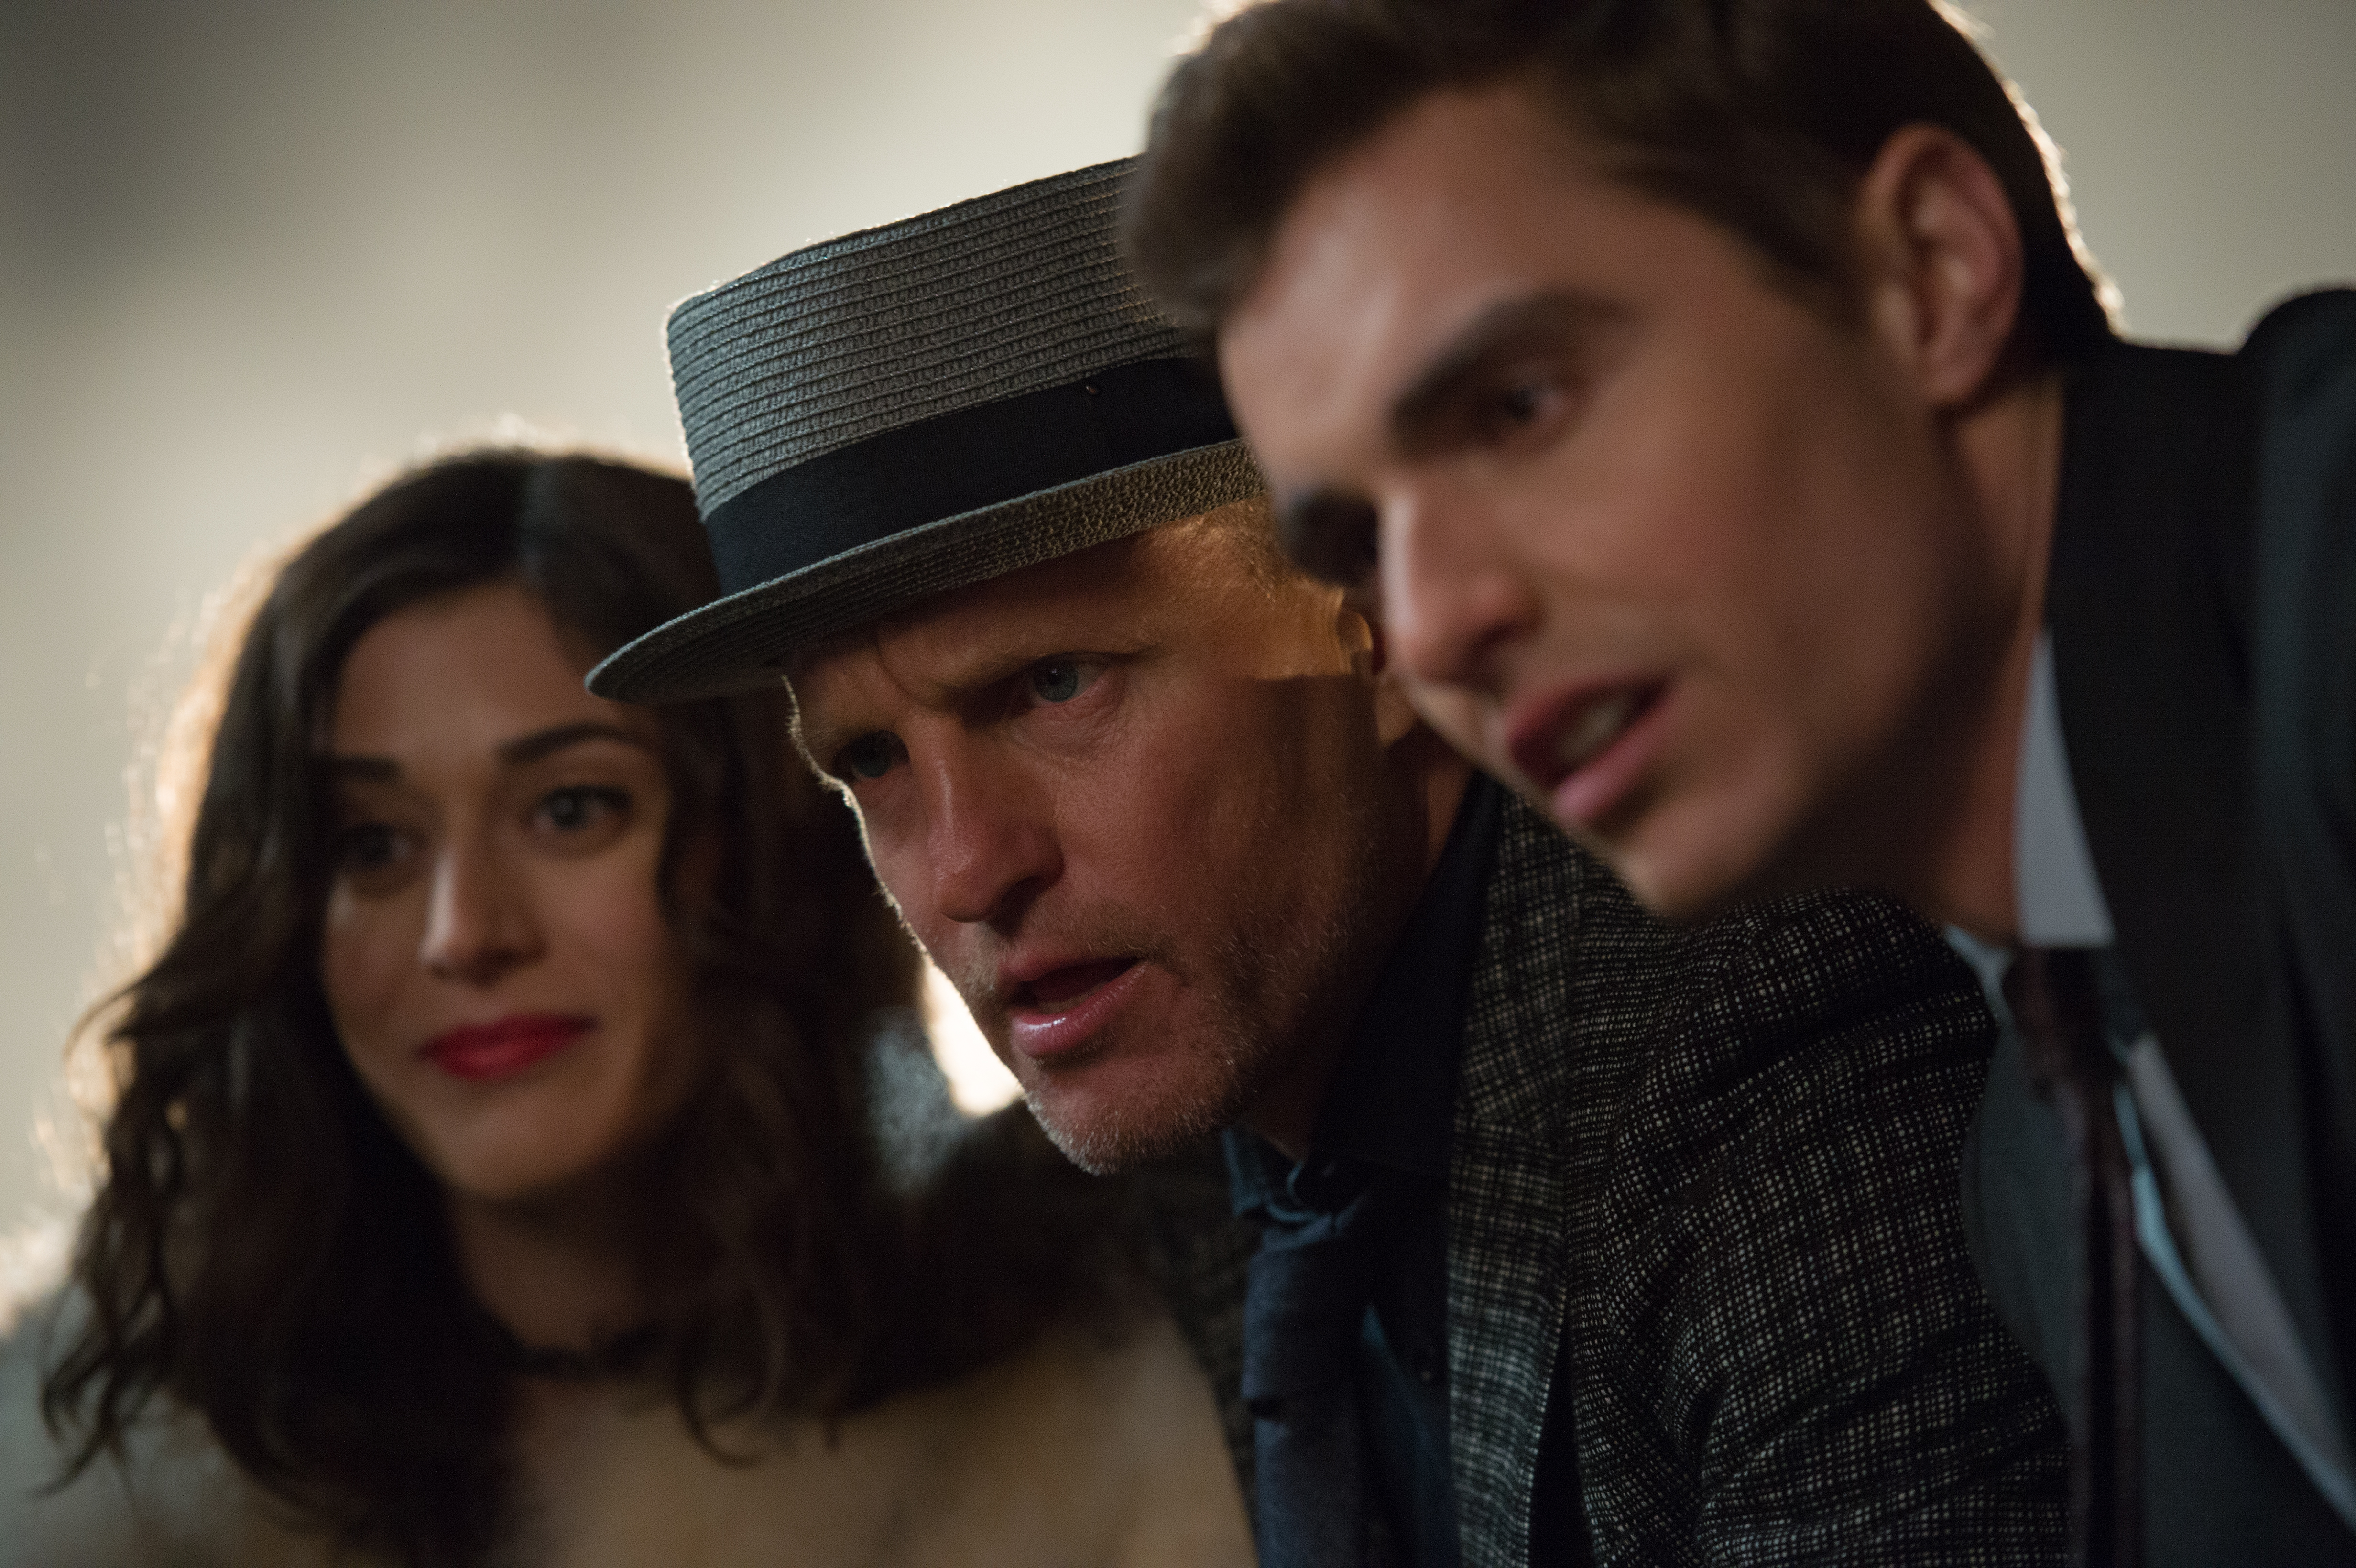 movie, now you see me 2, dave franco, jack wilder, lizzy caplan, lula (now you see me), merritt mckinney, woody harrelson